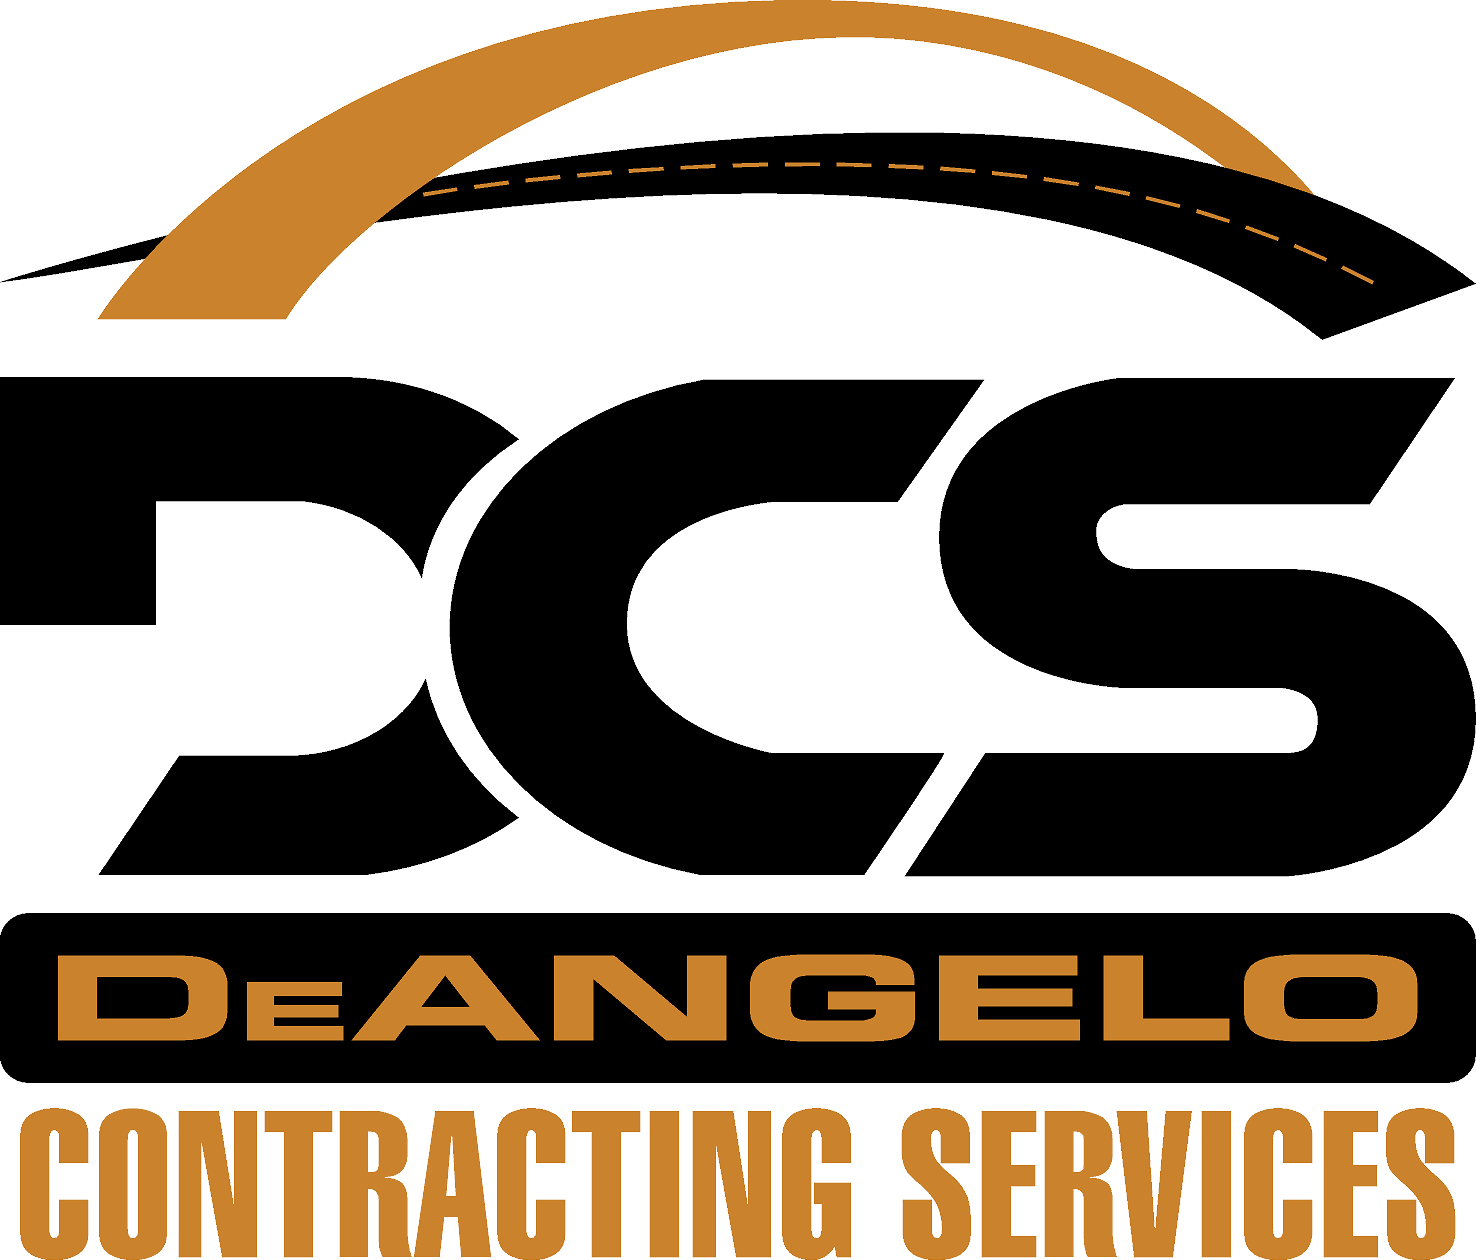 DeAngelo Contracting Services